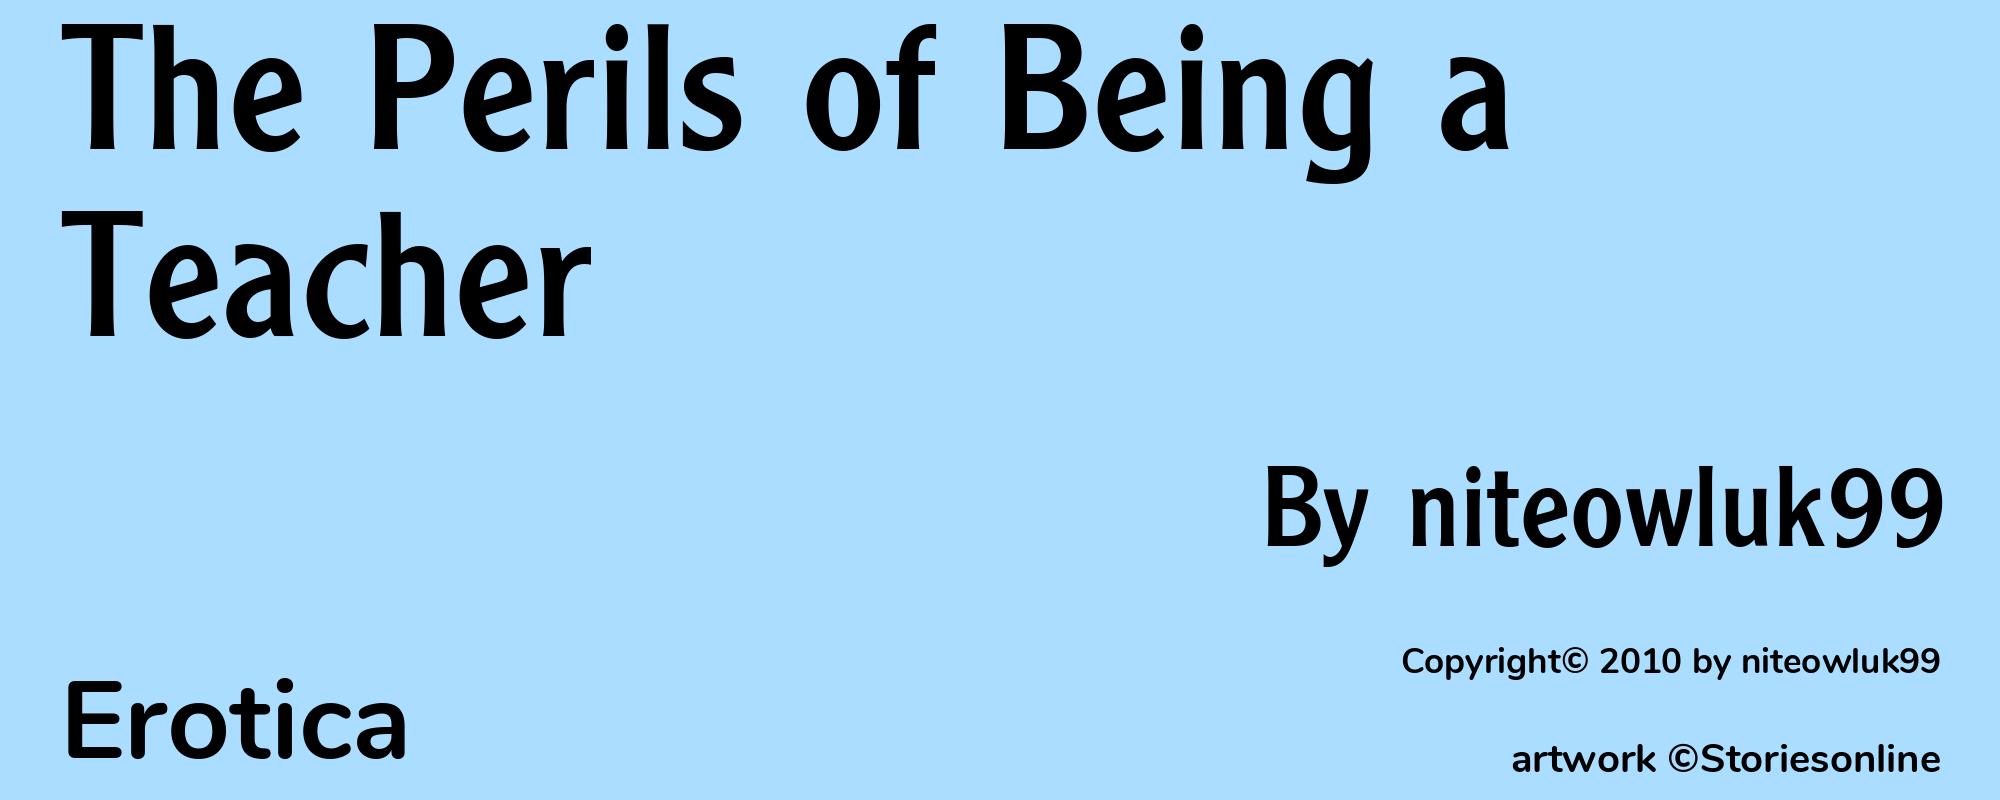 The Perils of Being a Teacher - Cover